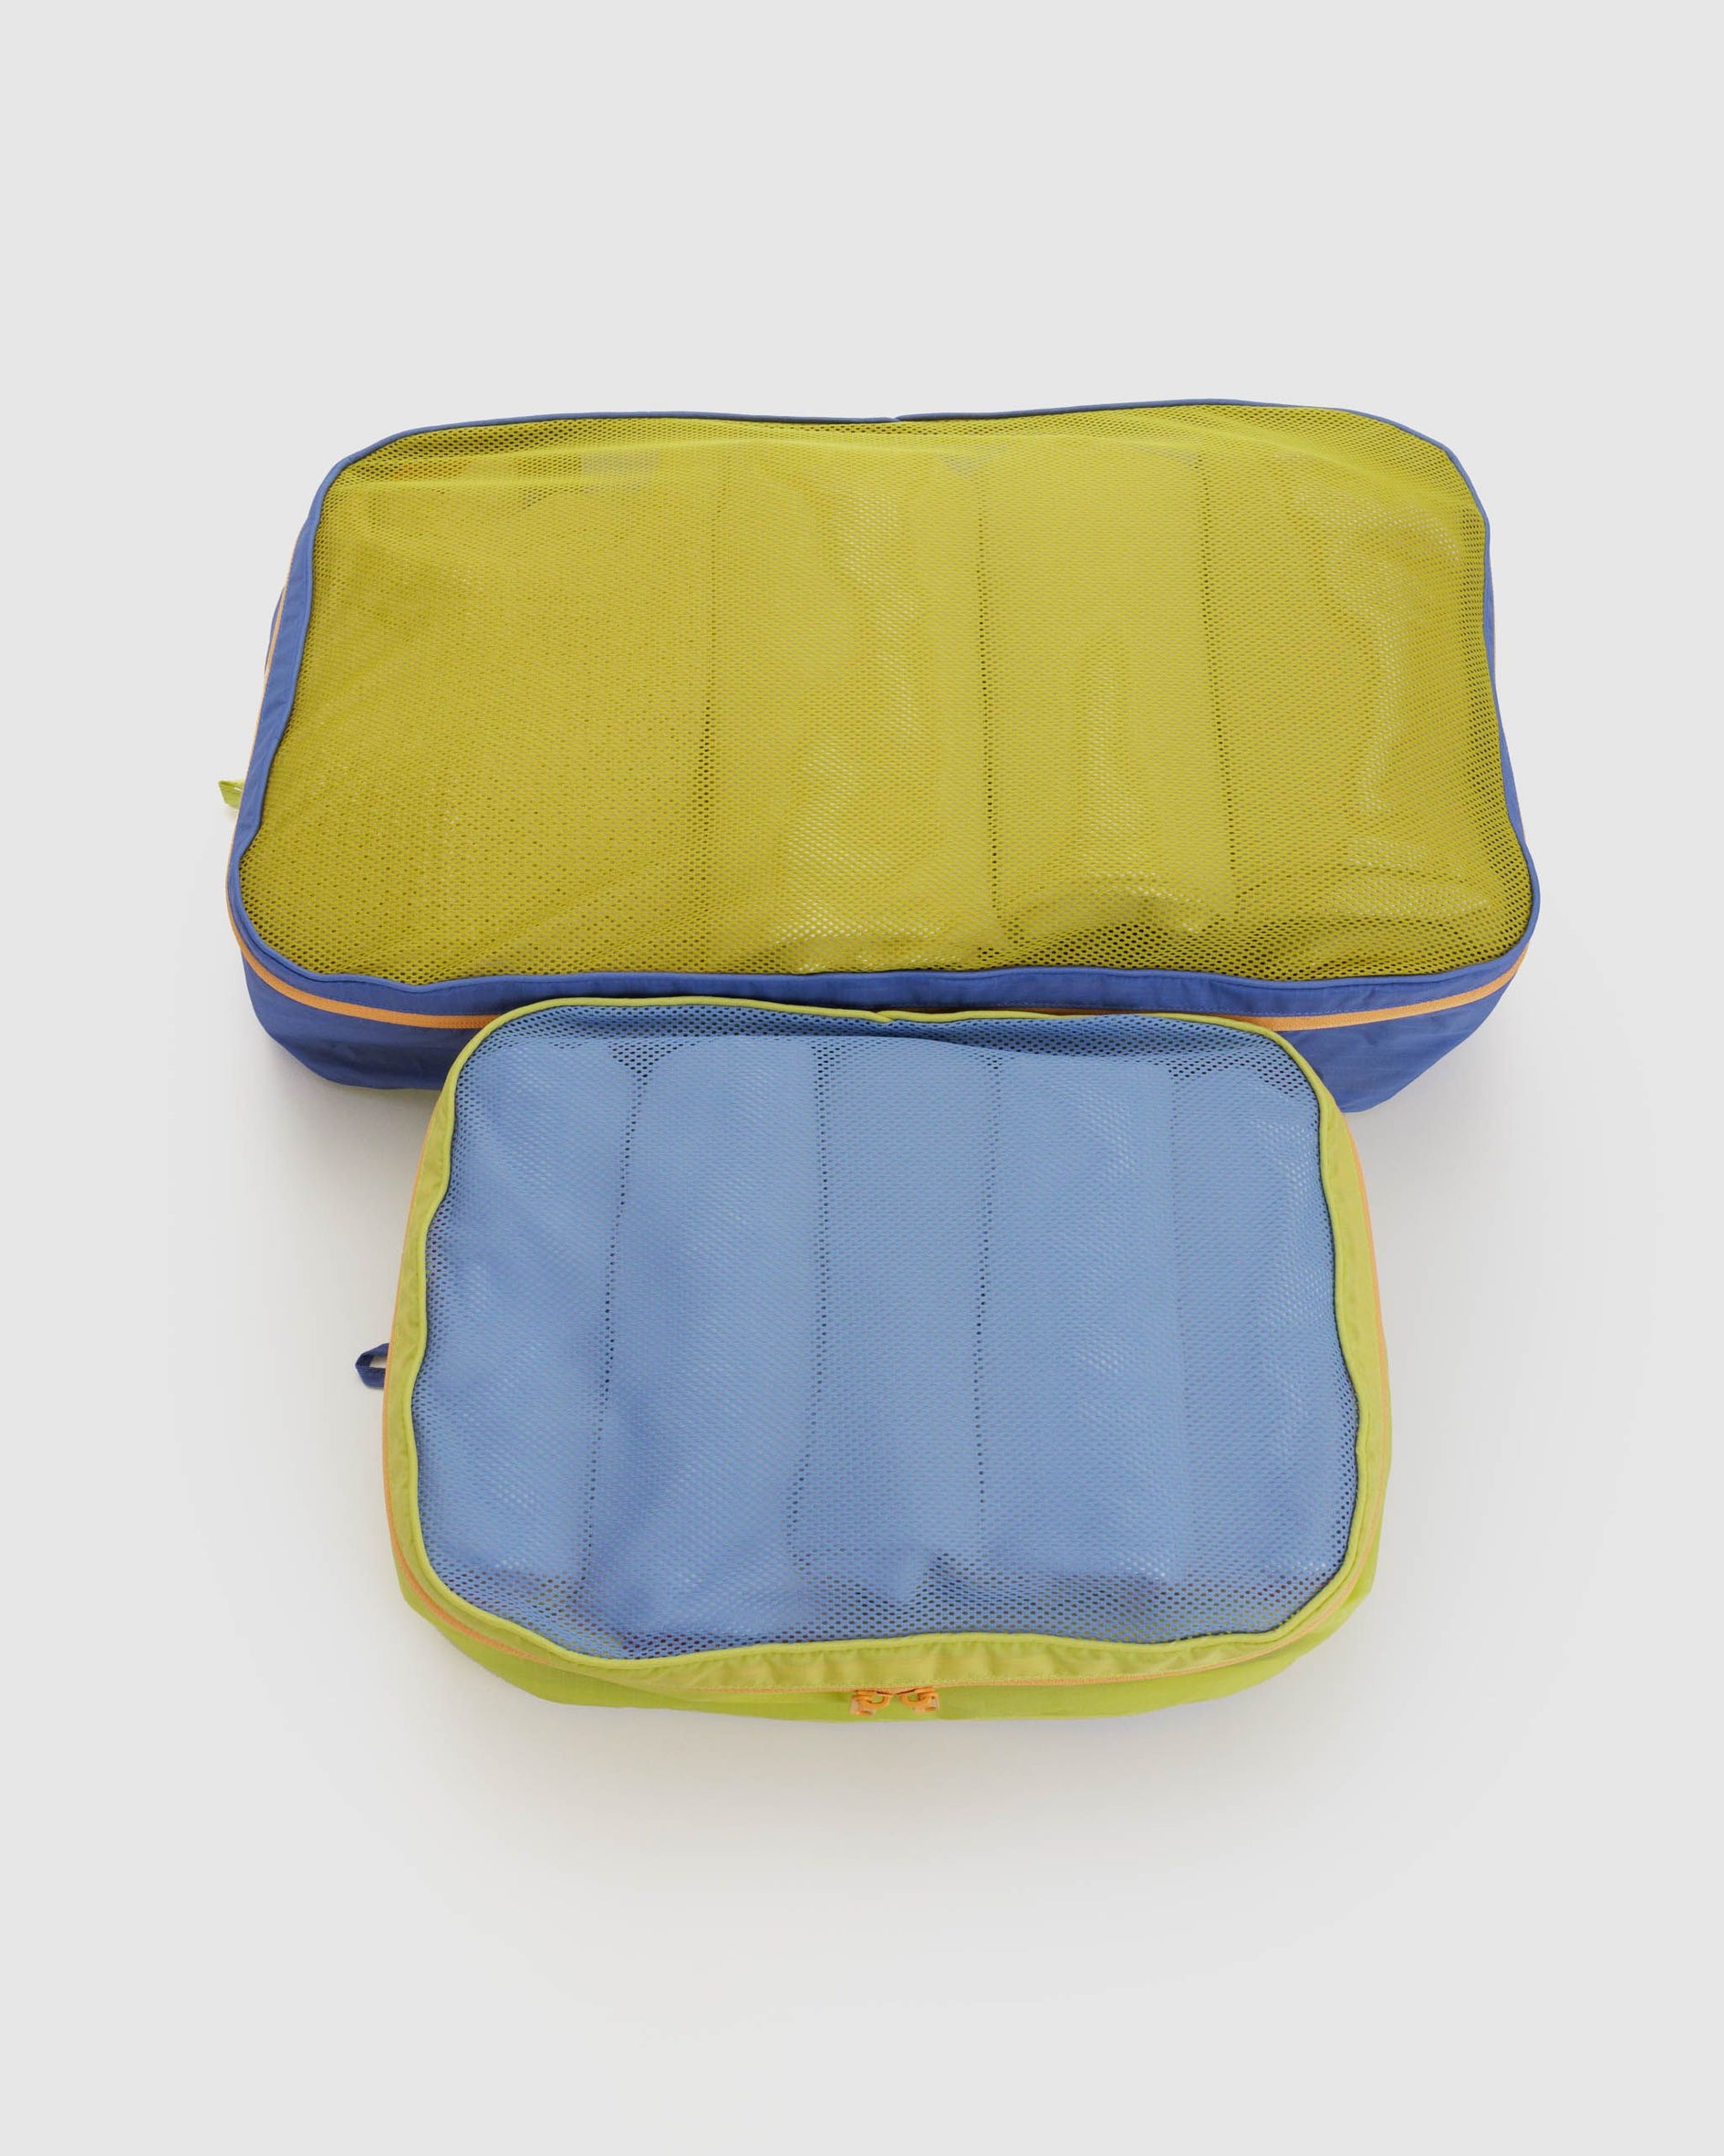 Ultralight Compression Packing Cubes Set - SuitedNomad